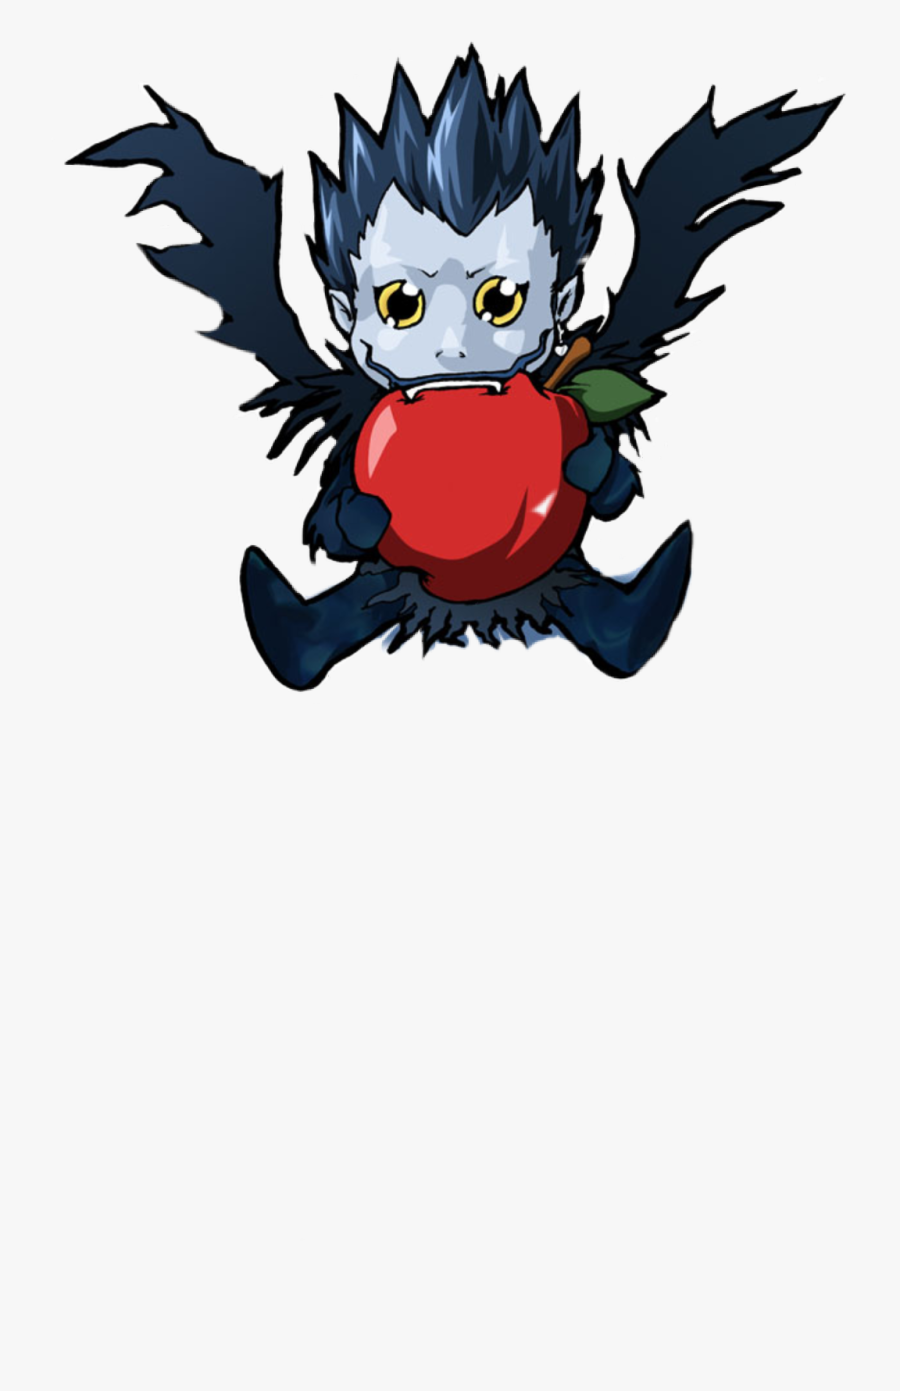 Ldid You Know God"s Of Death Love Apples *not My Art/picture - Death Note Рюк, Transparent Clipart